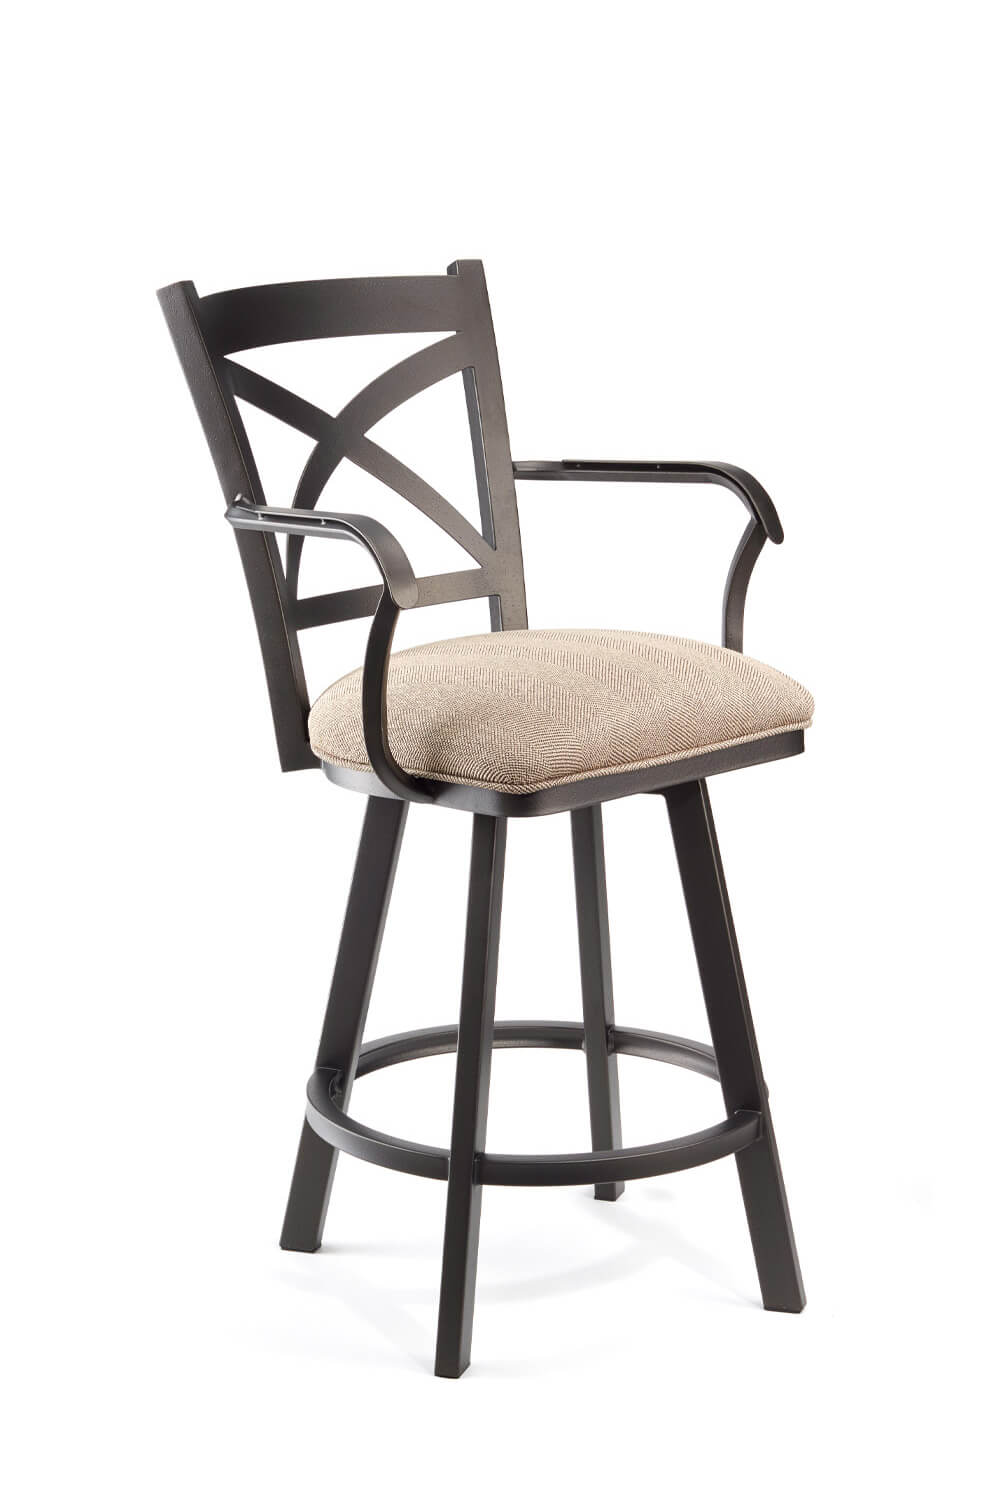 Edmonton Swivel Stool with Cross Back and Arms